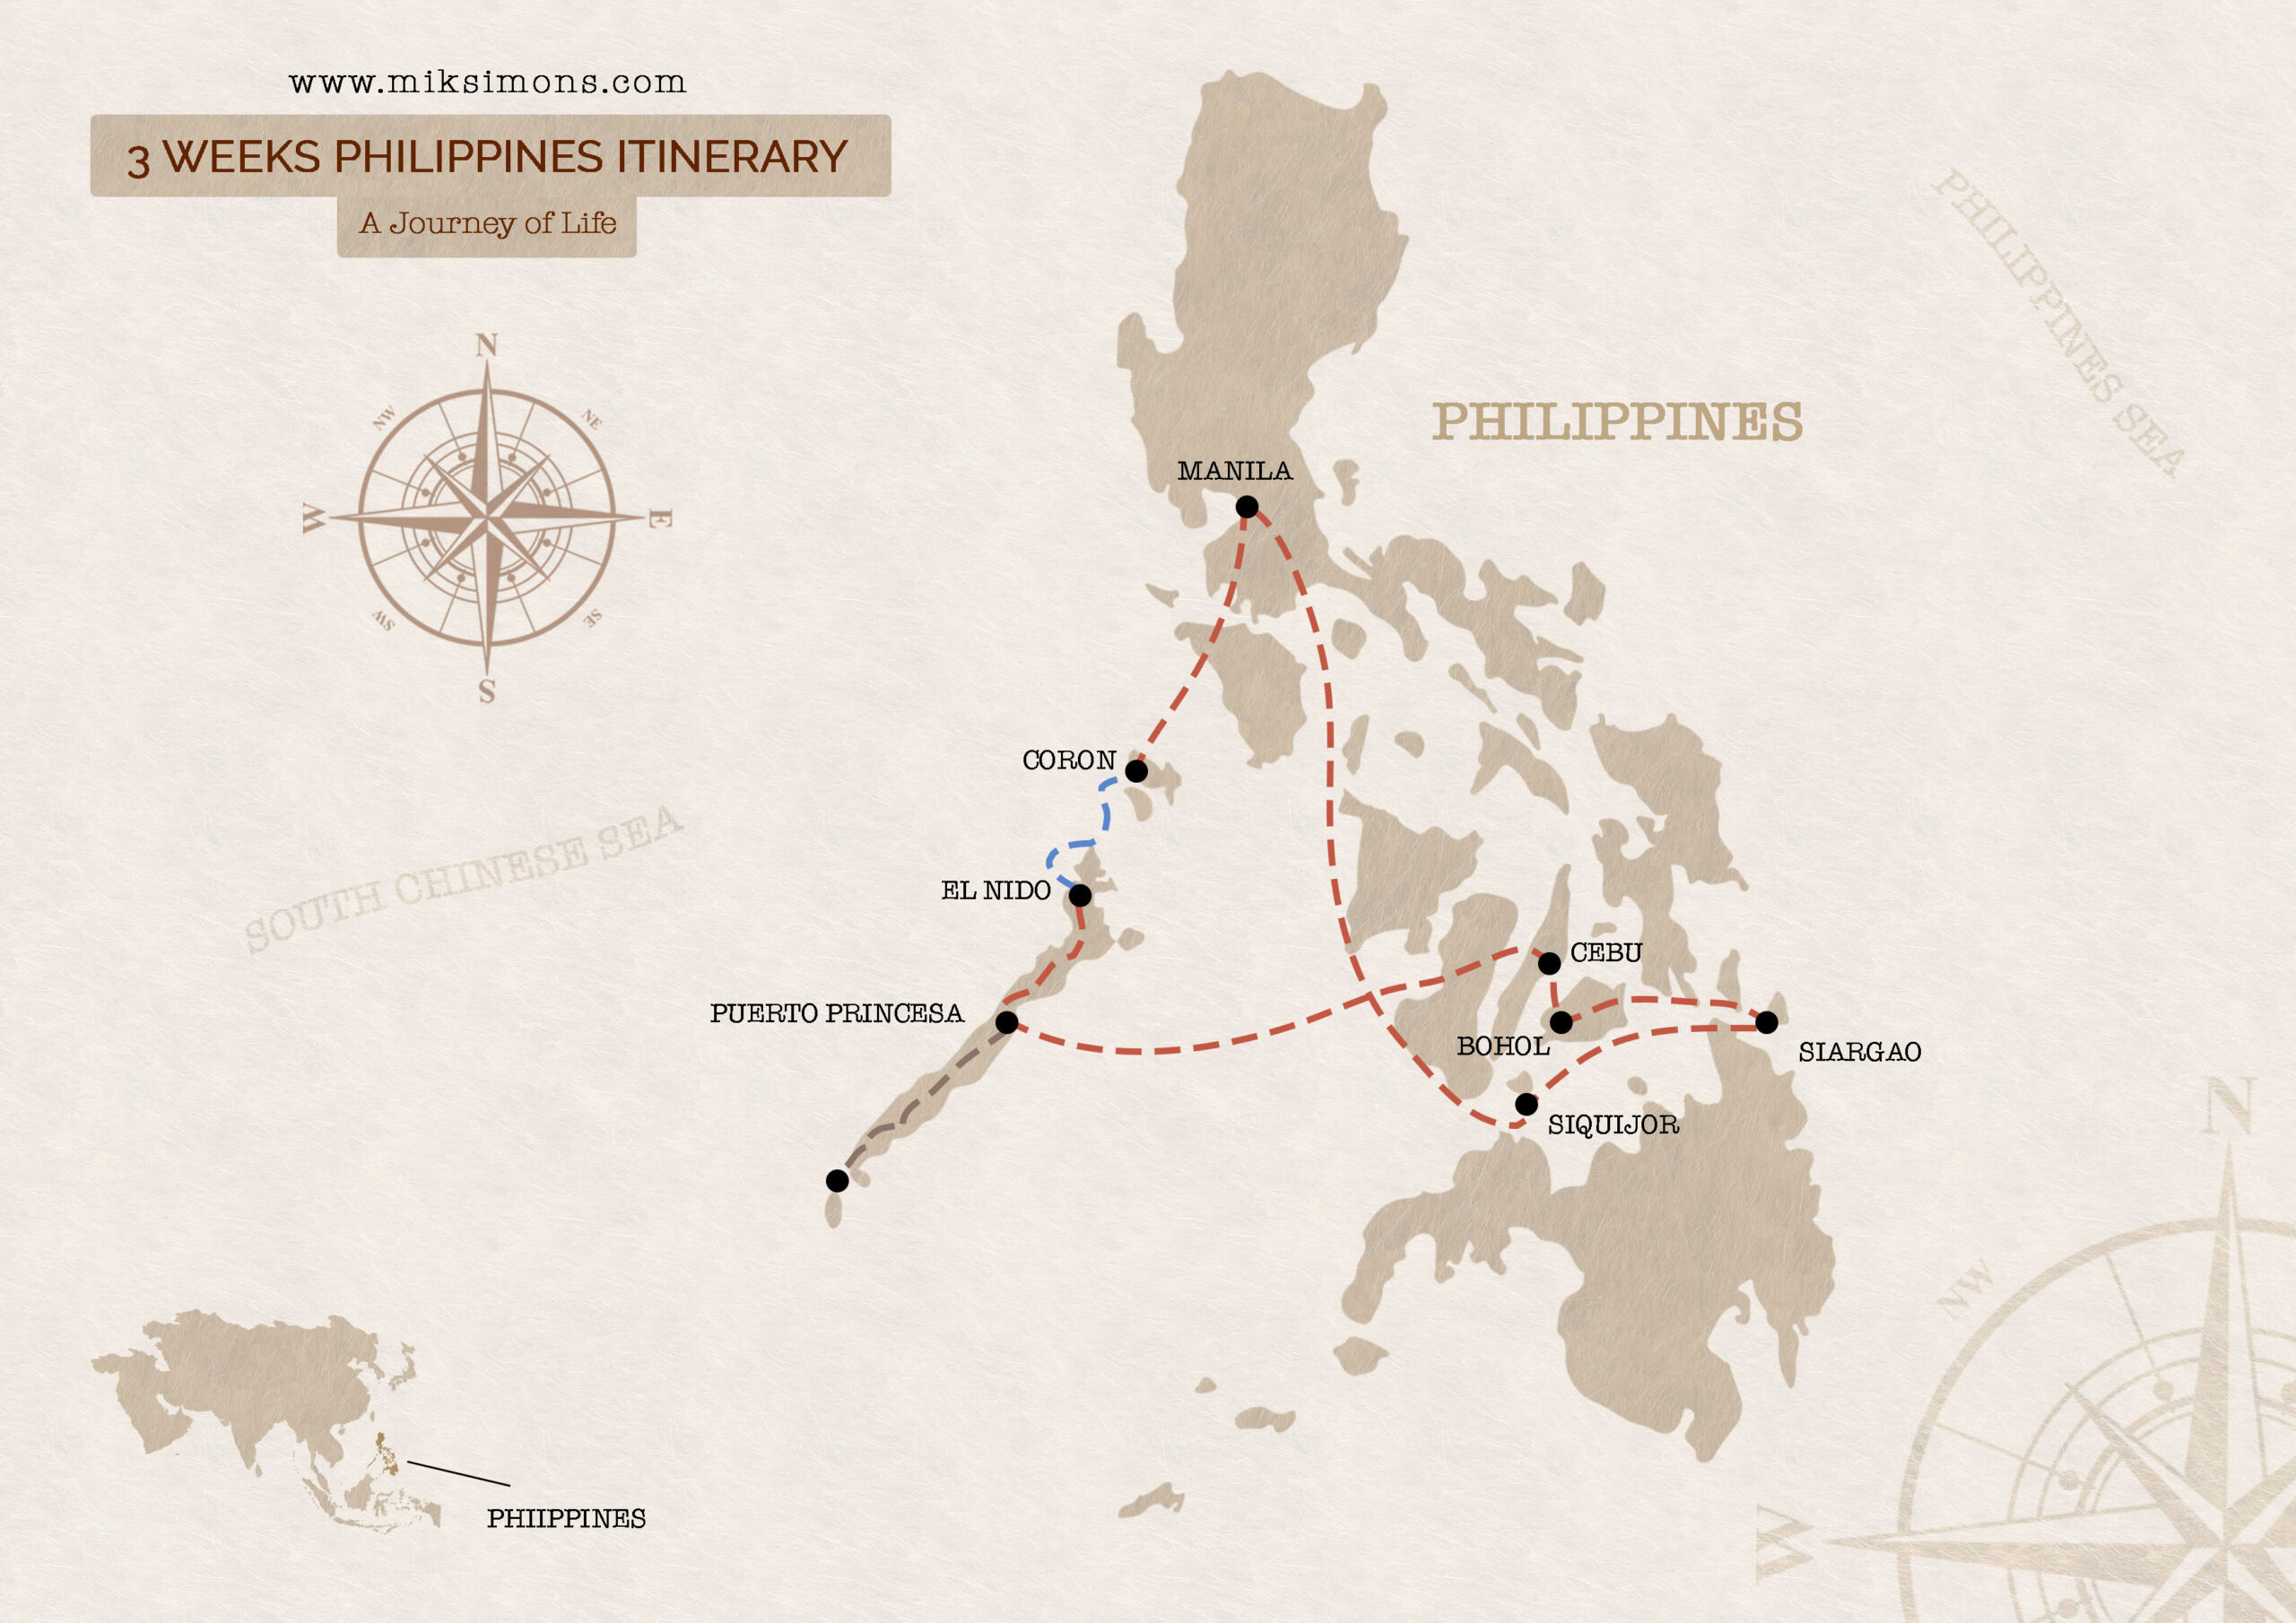 3 weeks in the Philippines itinerary - Adventure Map of the Philippines